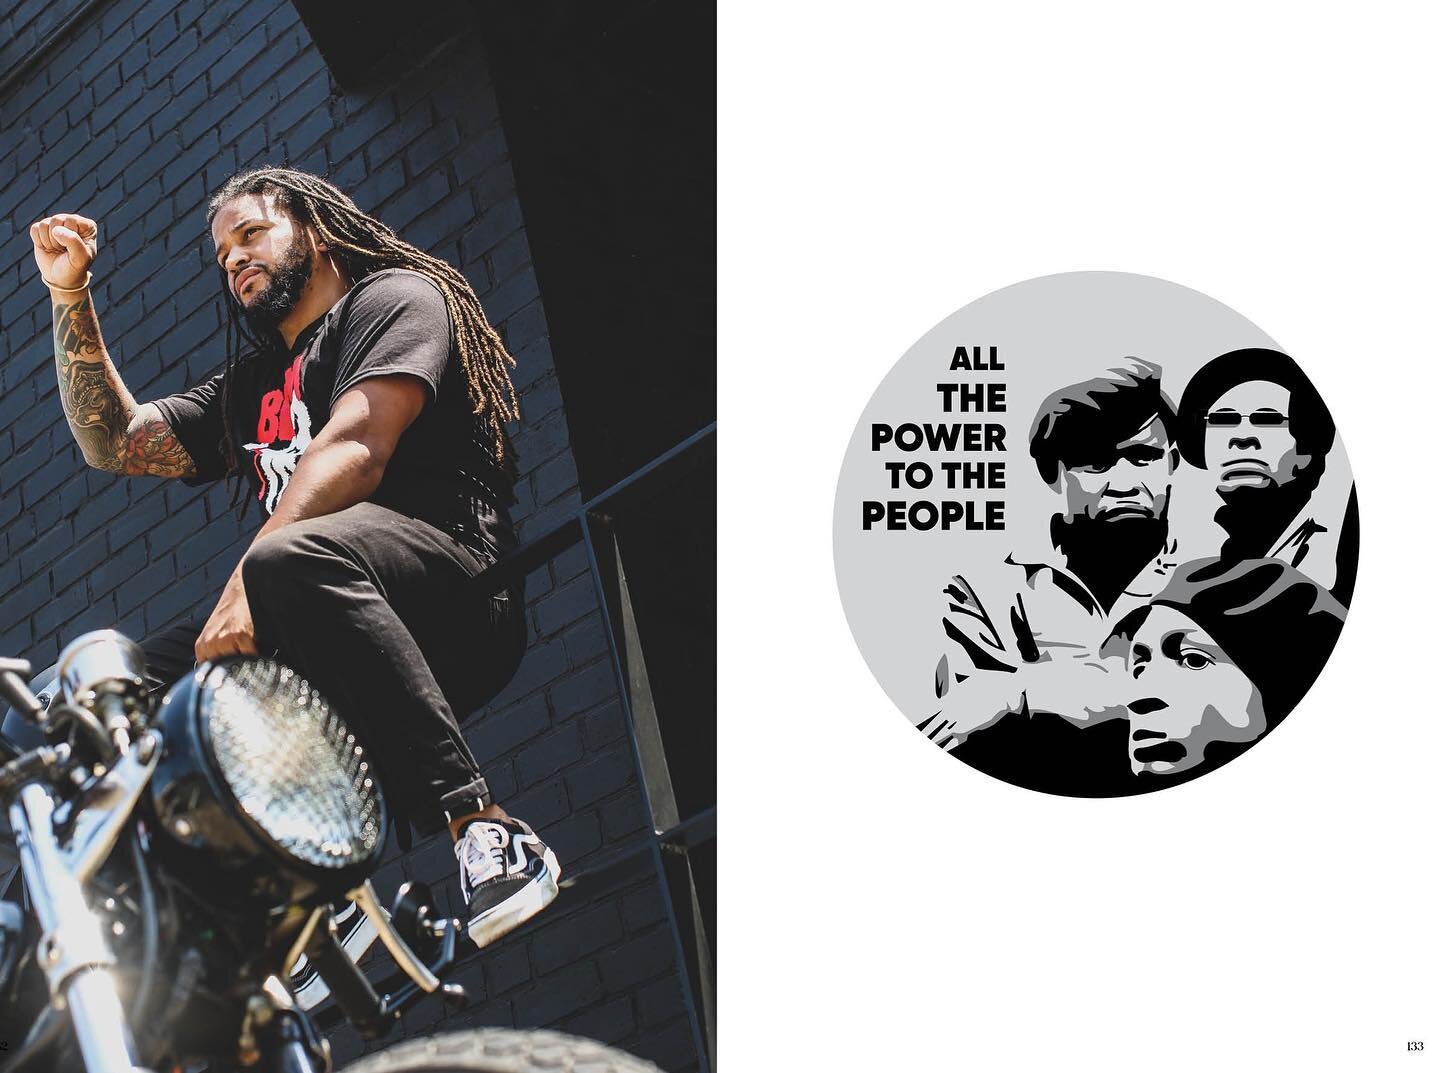 We shall continue to stand strong. Artist and rider @marsgreen joined us from D.C. to explain how he helps foster change and progress in his city for those overlooked. We the people promise to be an ally to all human beings, especially those victimiz